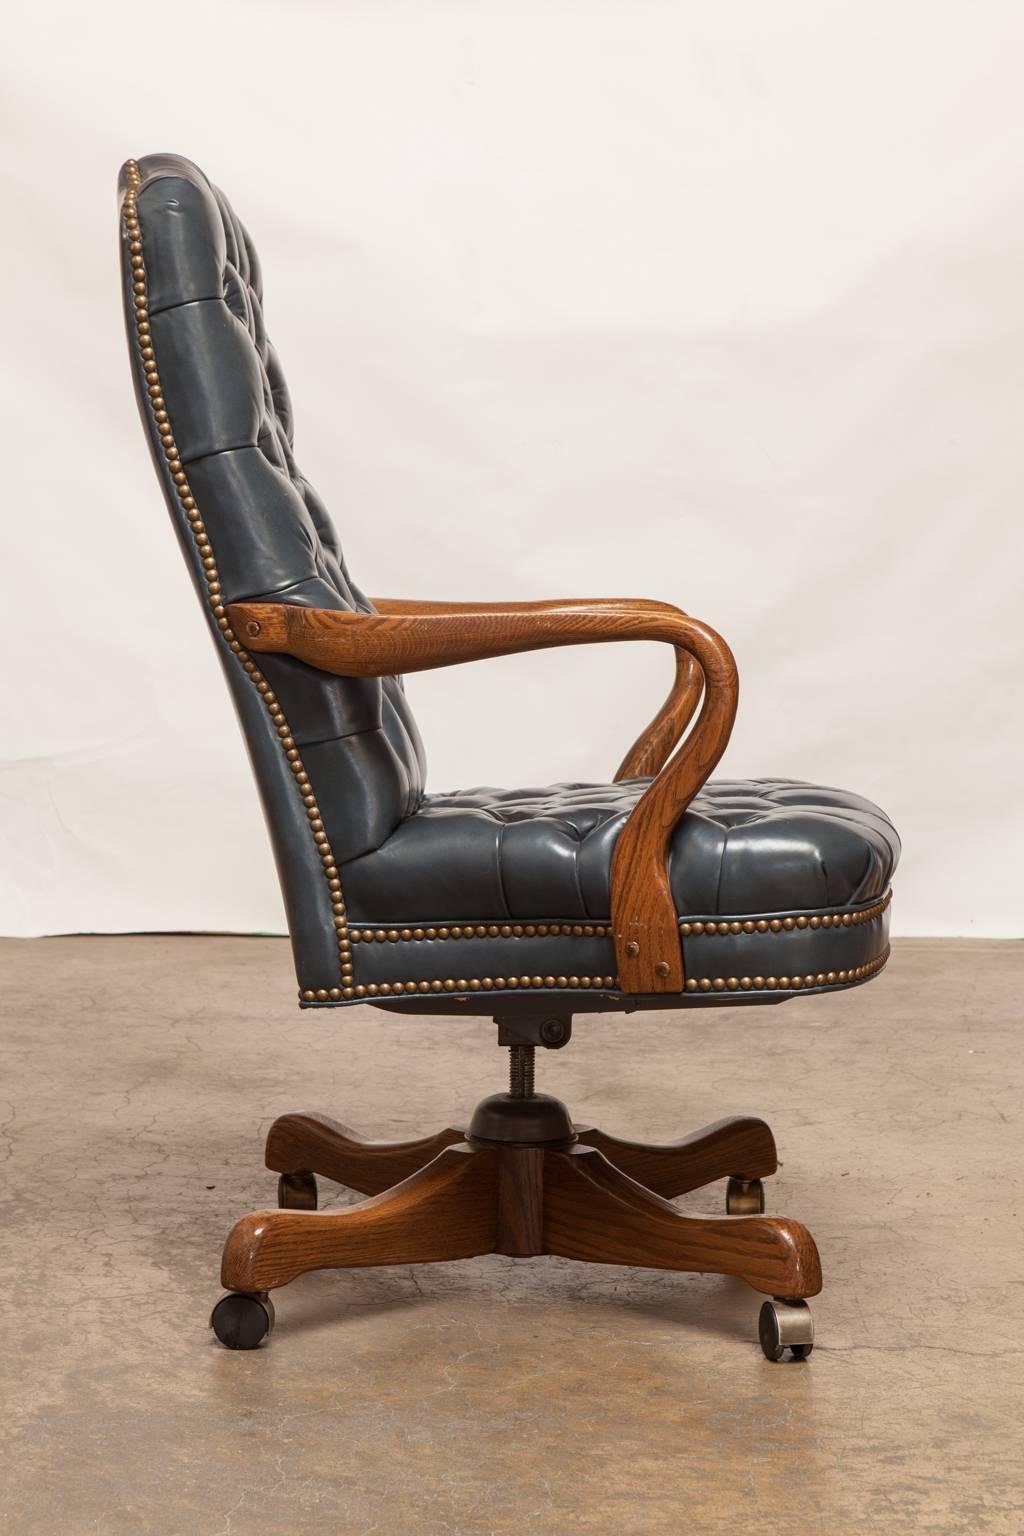 Impressive executive desk chair featuring a French blue tufted leather upholstery and accented by brass nail head trim. Produced by Schafer Bros. with soft, pliable leather in excellent condition. Supported by a wooden base on casters. Matching